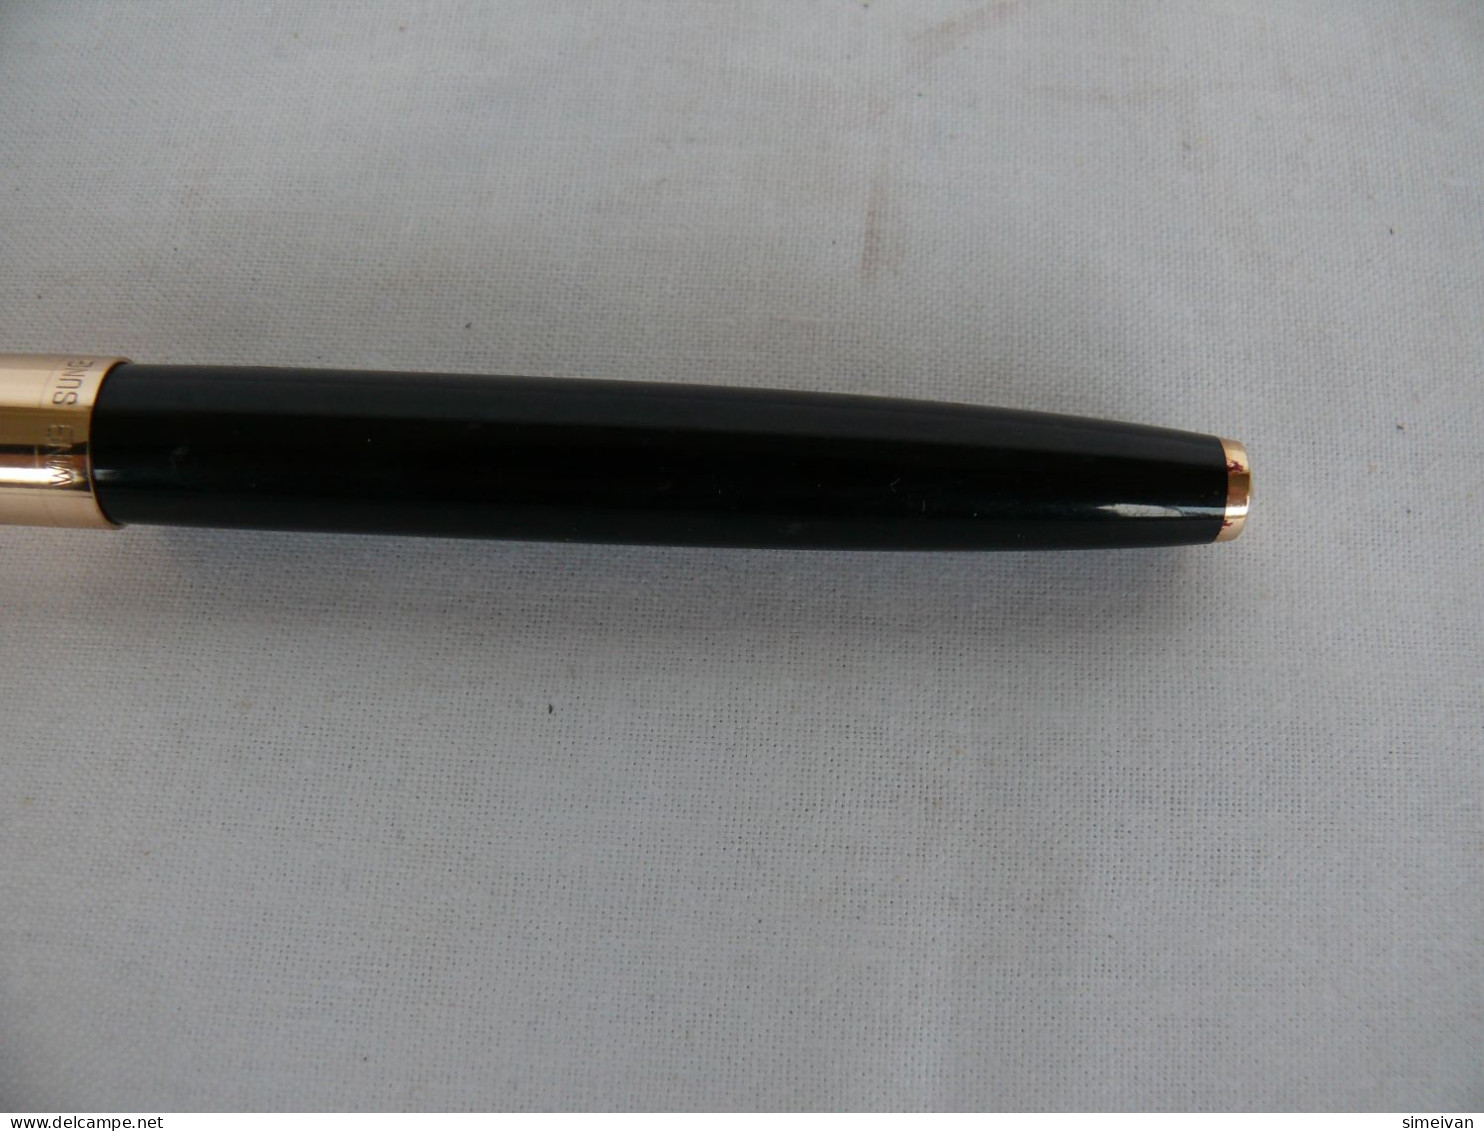 Vintage Wing Sung Fountain Pen Black Body Gold Cap Made In China #2026 - Stylos